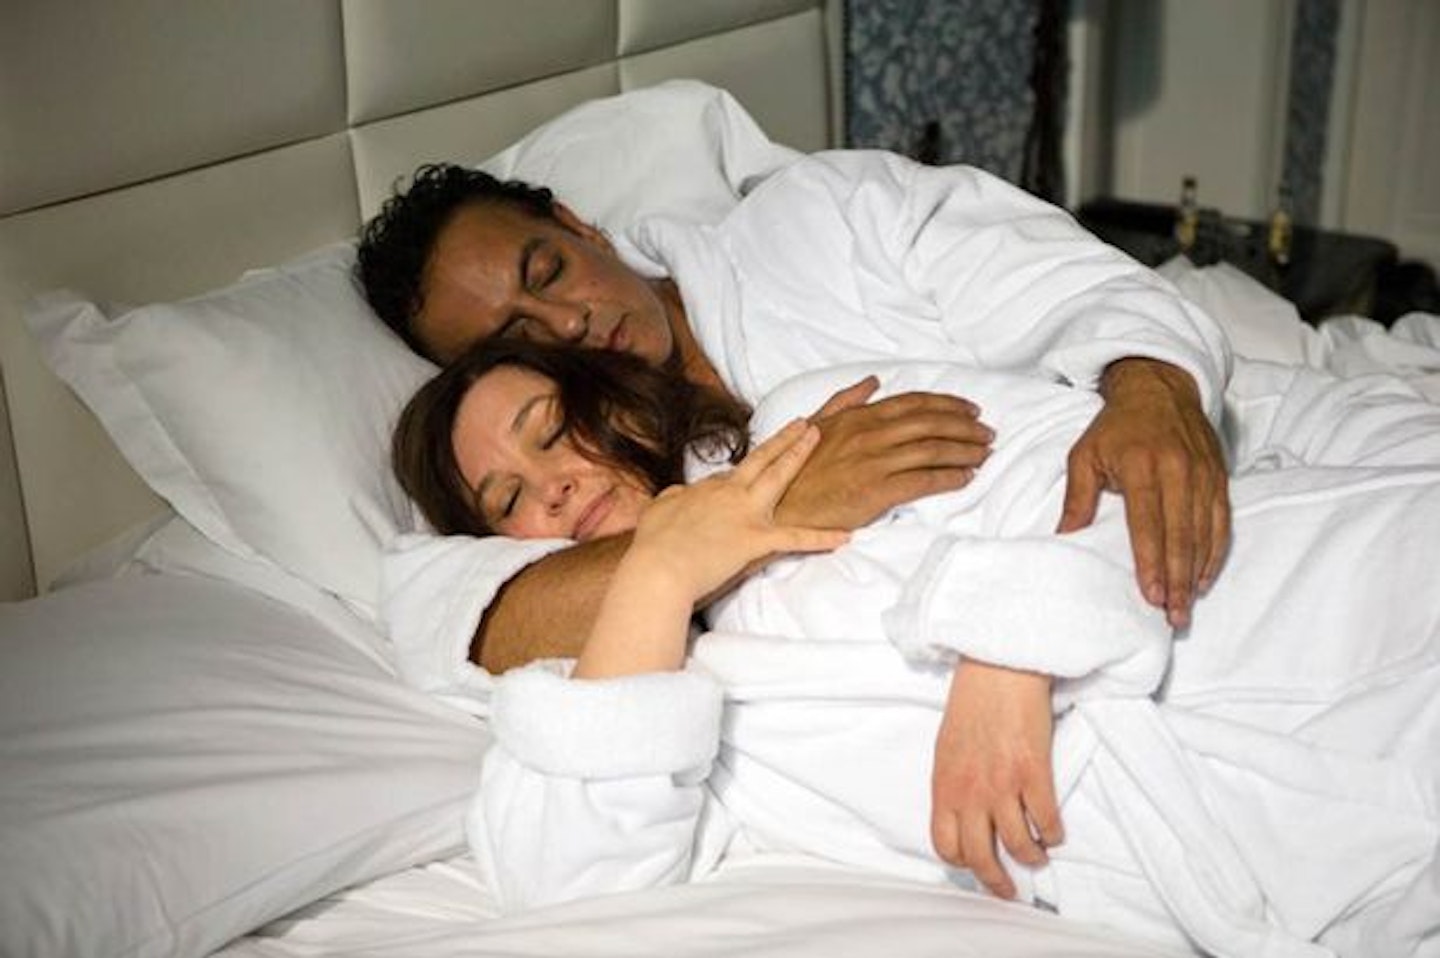 Coronation Street Dev Alahan and Mary Taylor end up in bed together